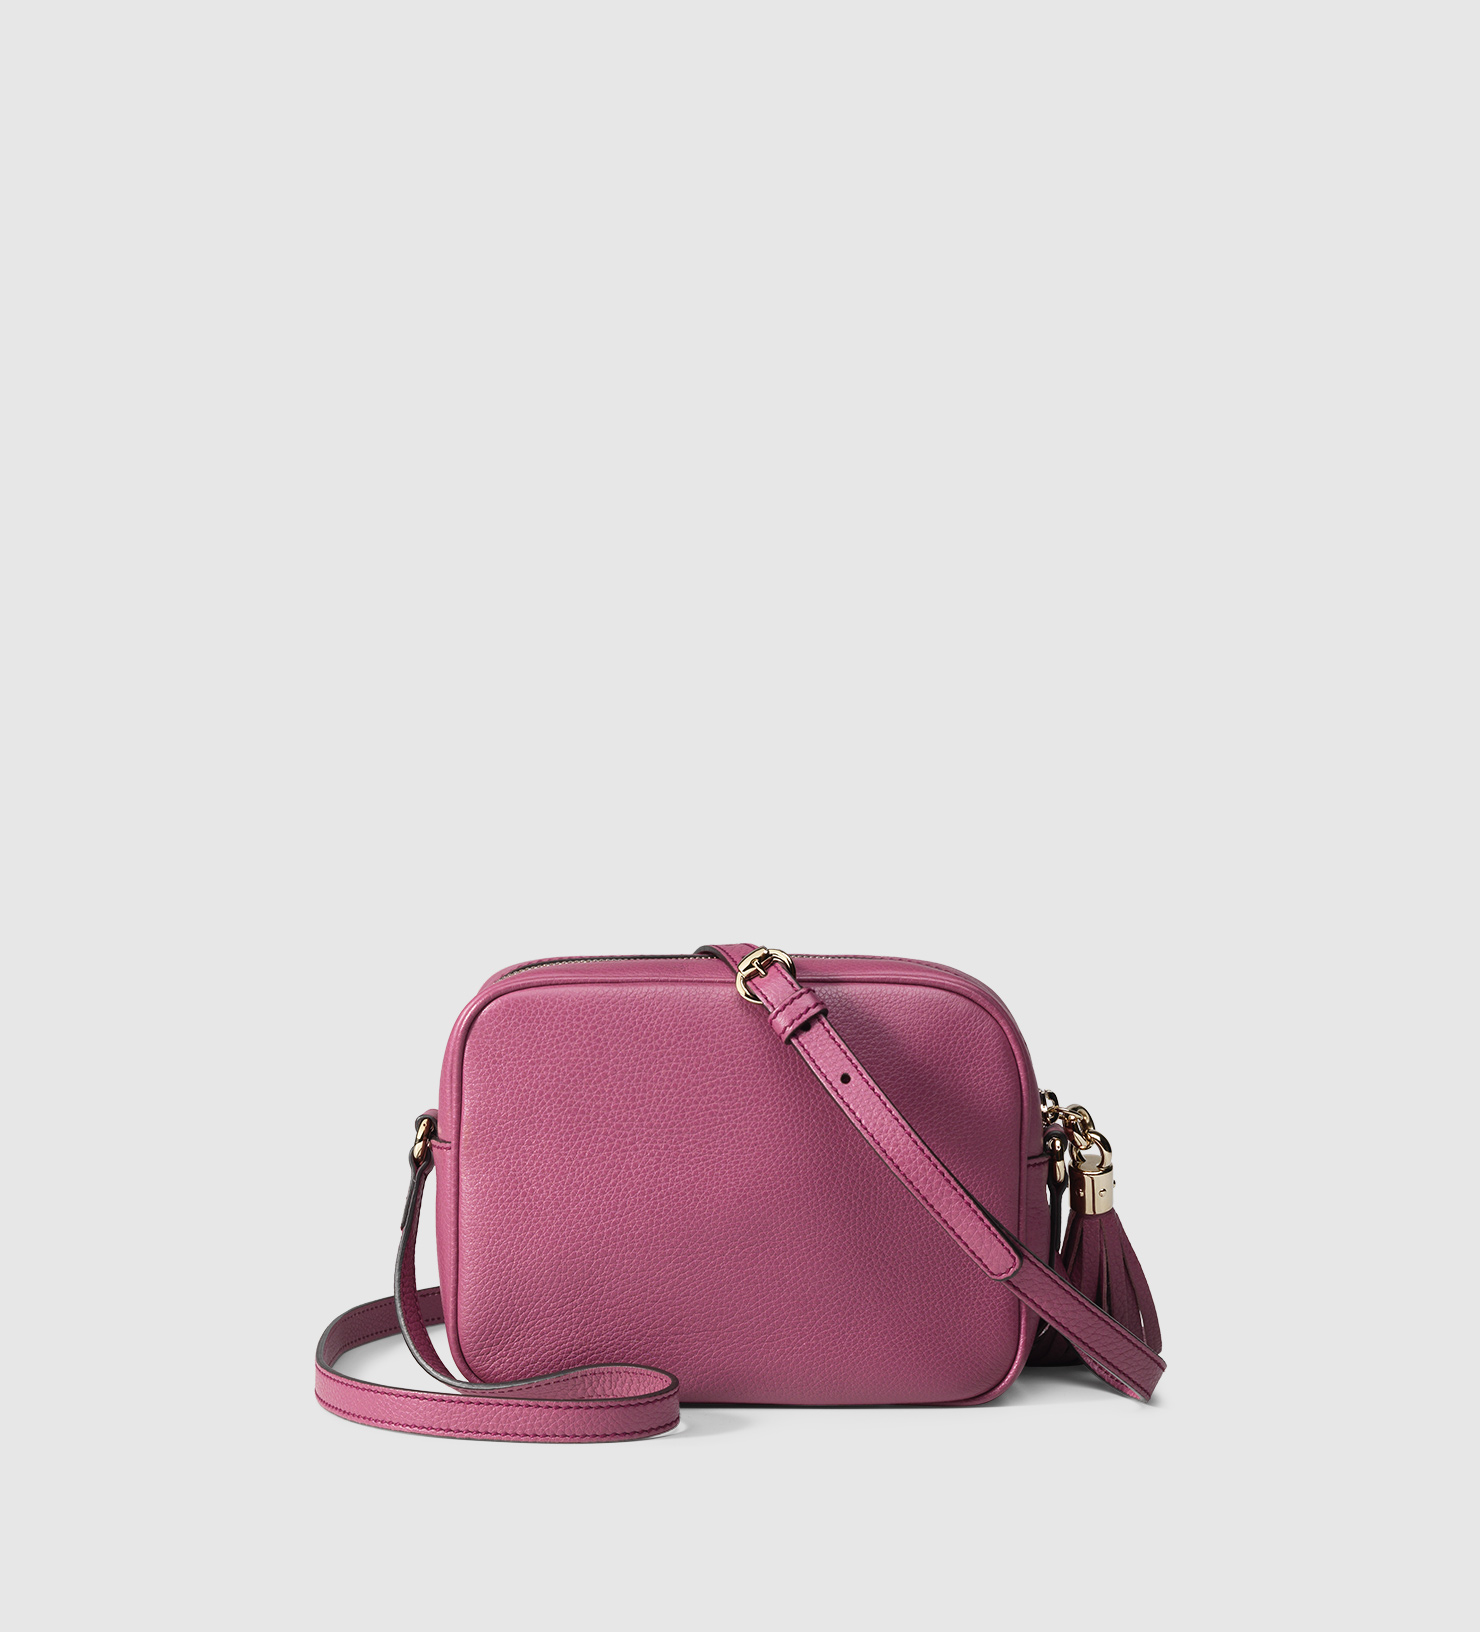 Gucci Soho Leather Disco Bag in Natural (Purple) - Lyst